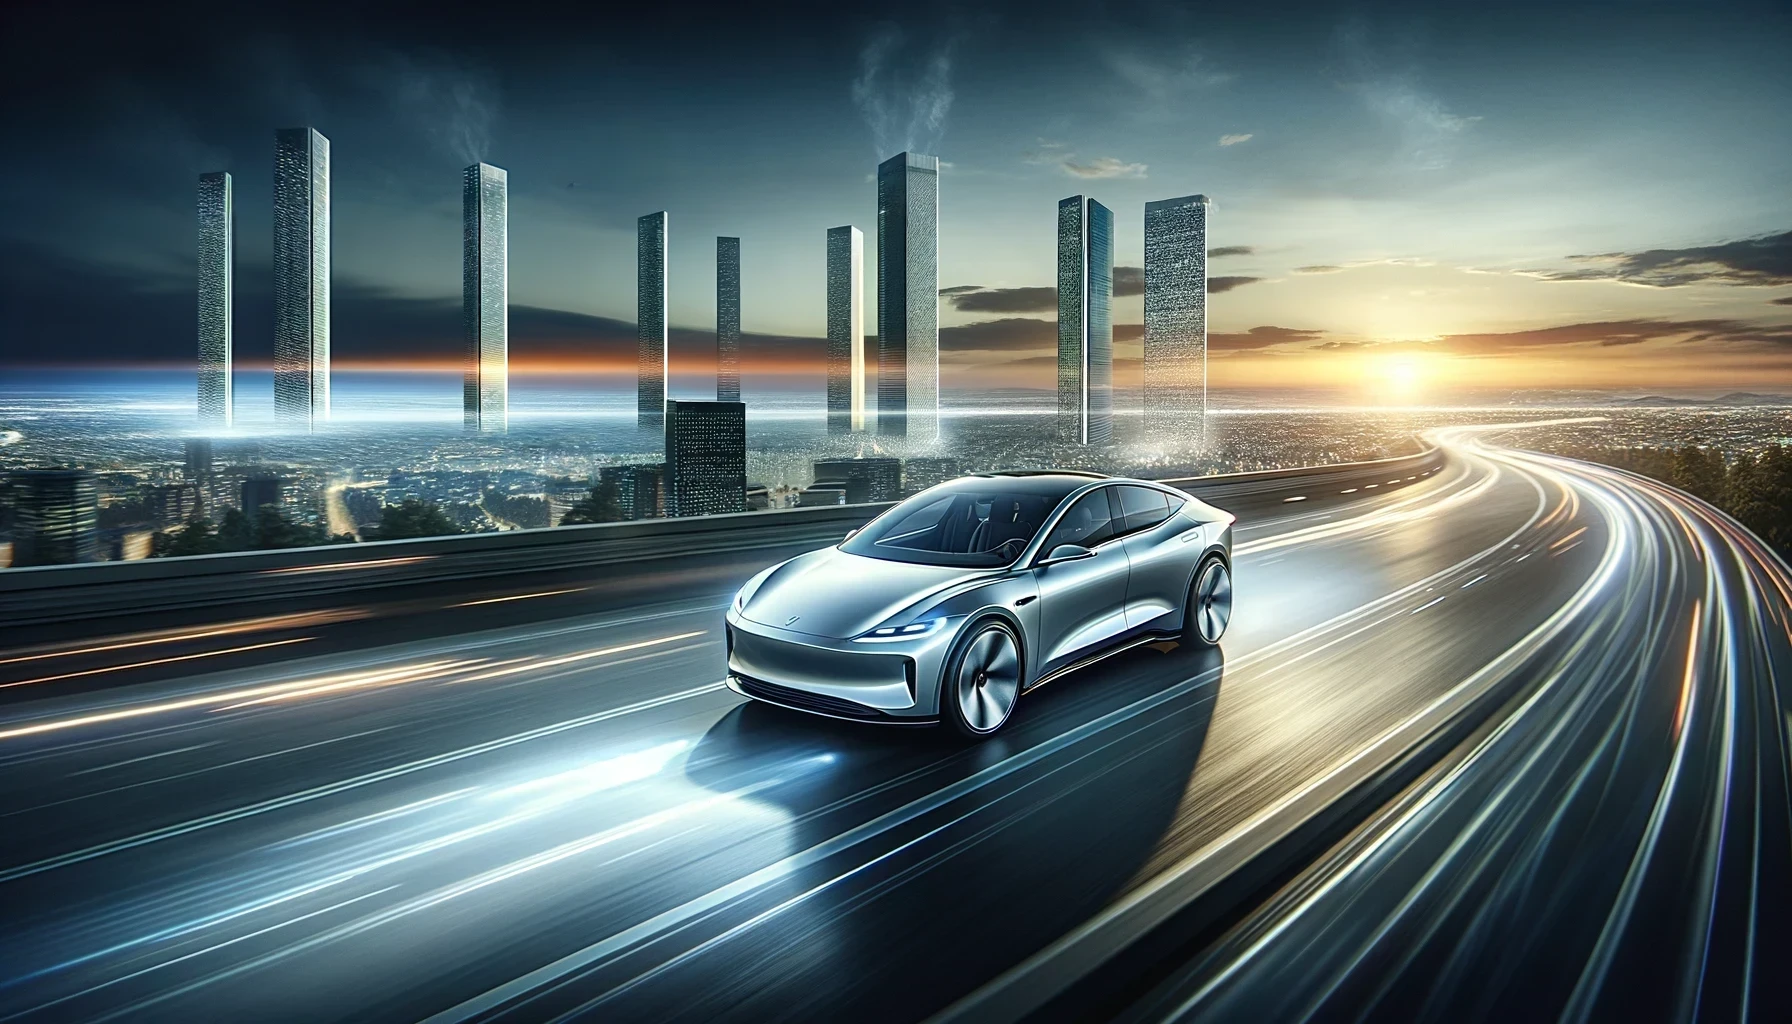 A sleek electric sedan speeds through a futuristic cityscape at dusk, reflecting innovation and sustainability in electric vehicle technology, with modern buildings and integrated solar panels highlighting a clean, energy-efficient future.